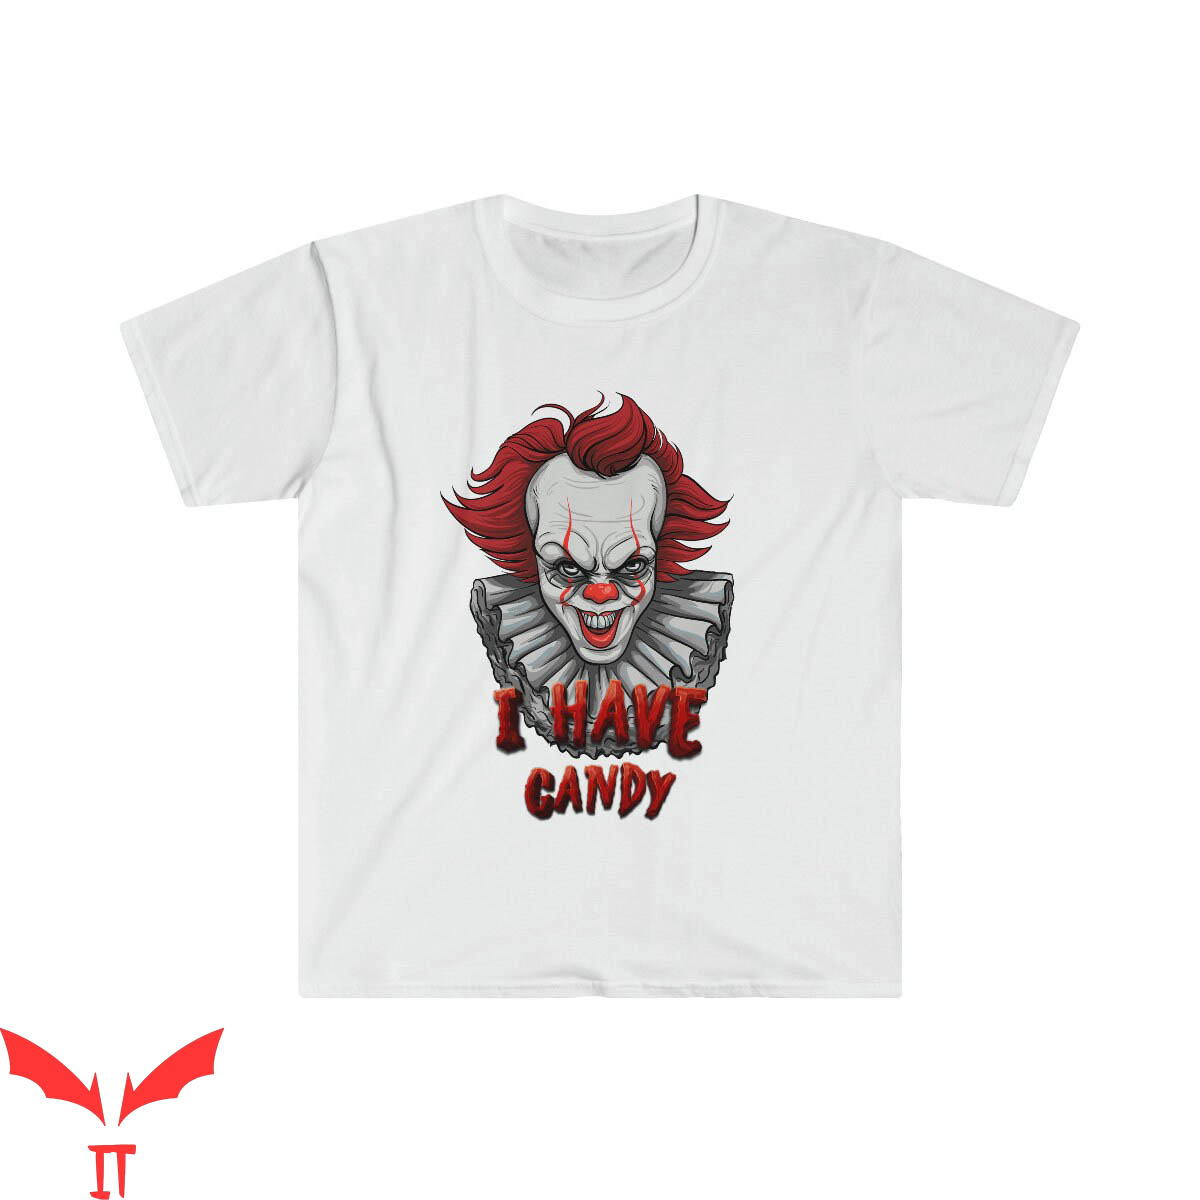 IT T-Shirt I Have Candy Halloween Pennywise IT The Movie